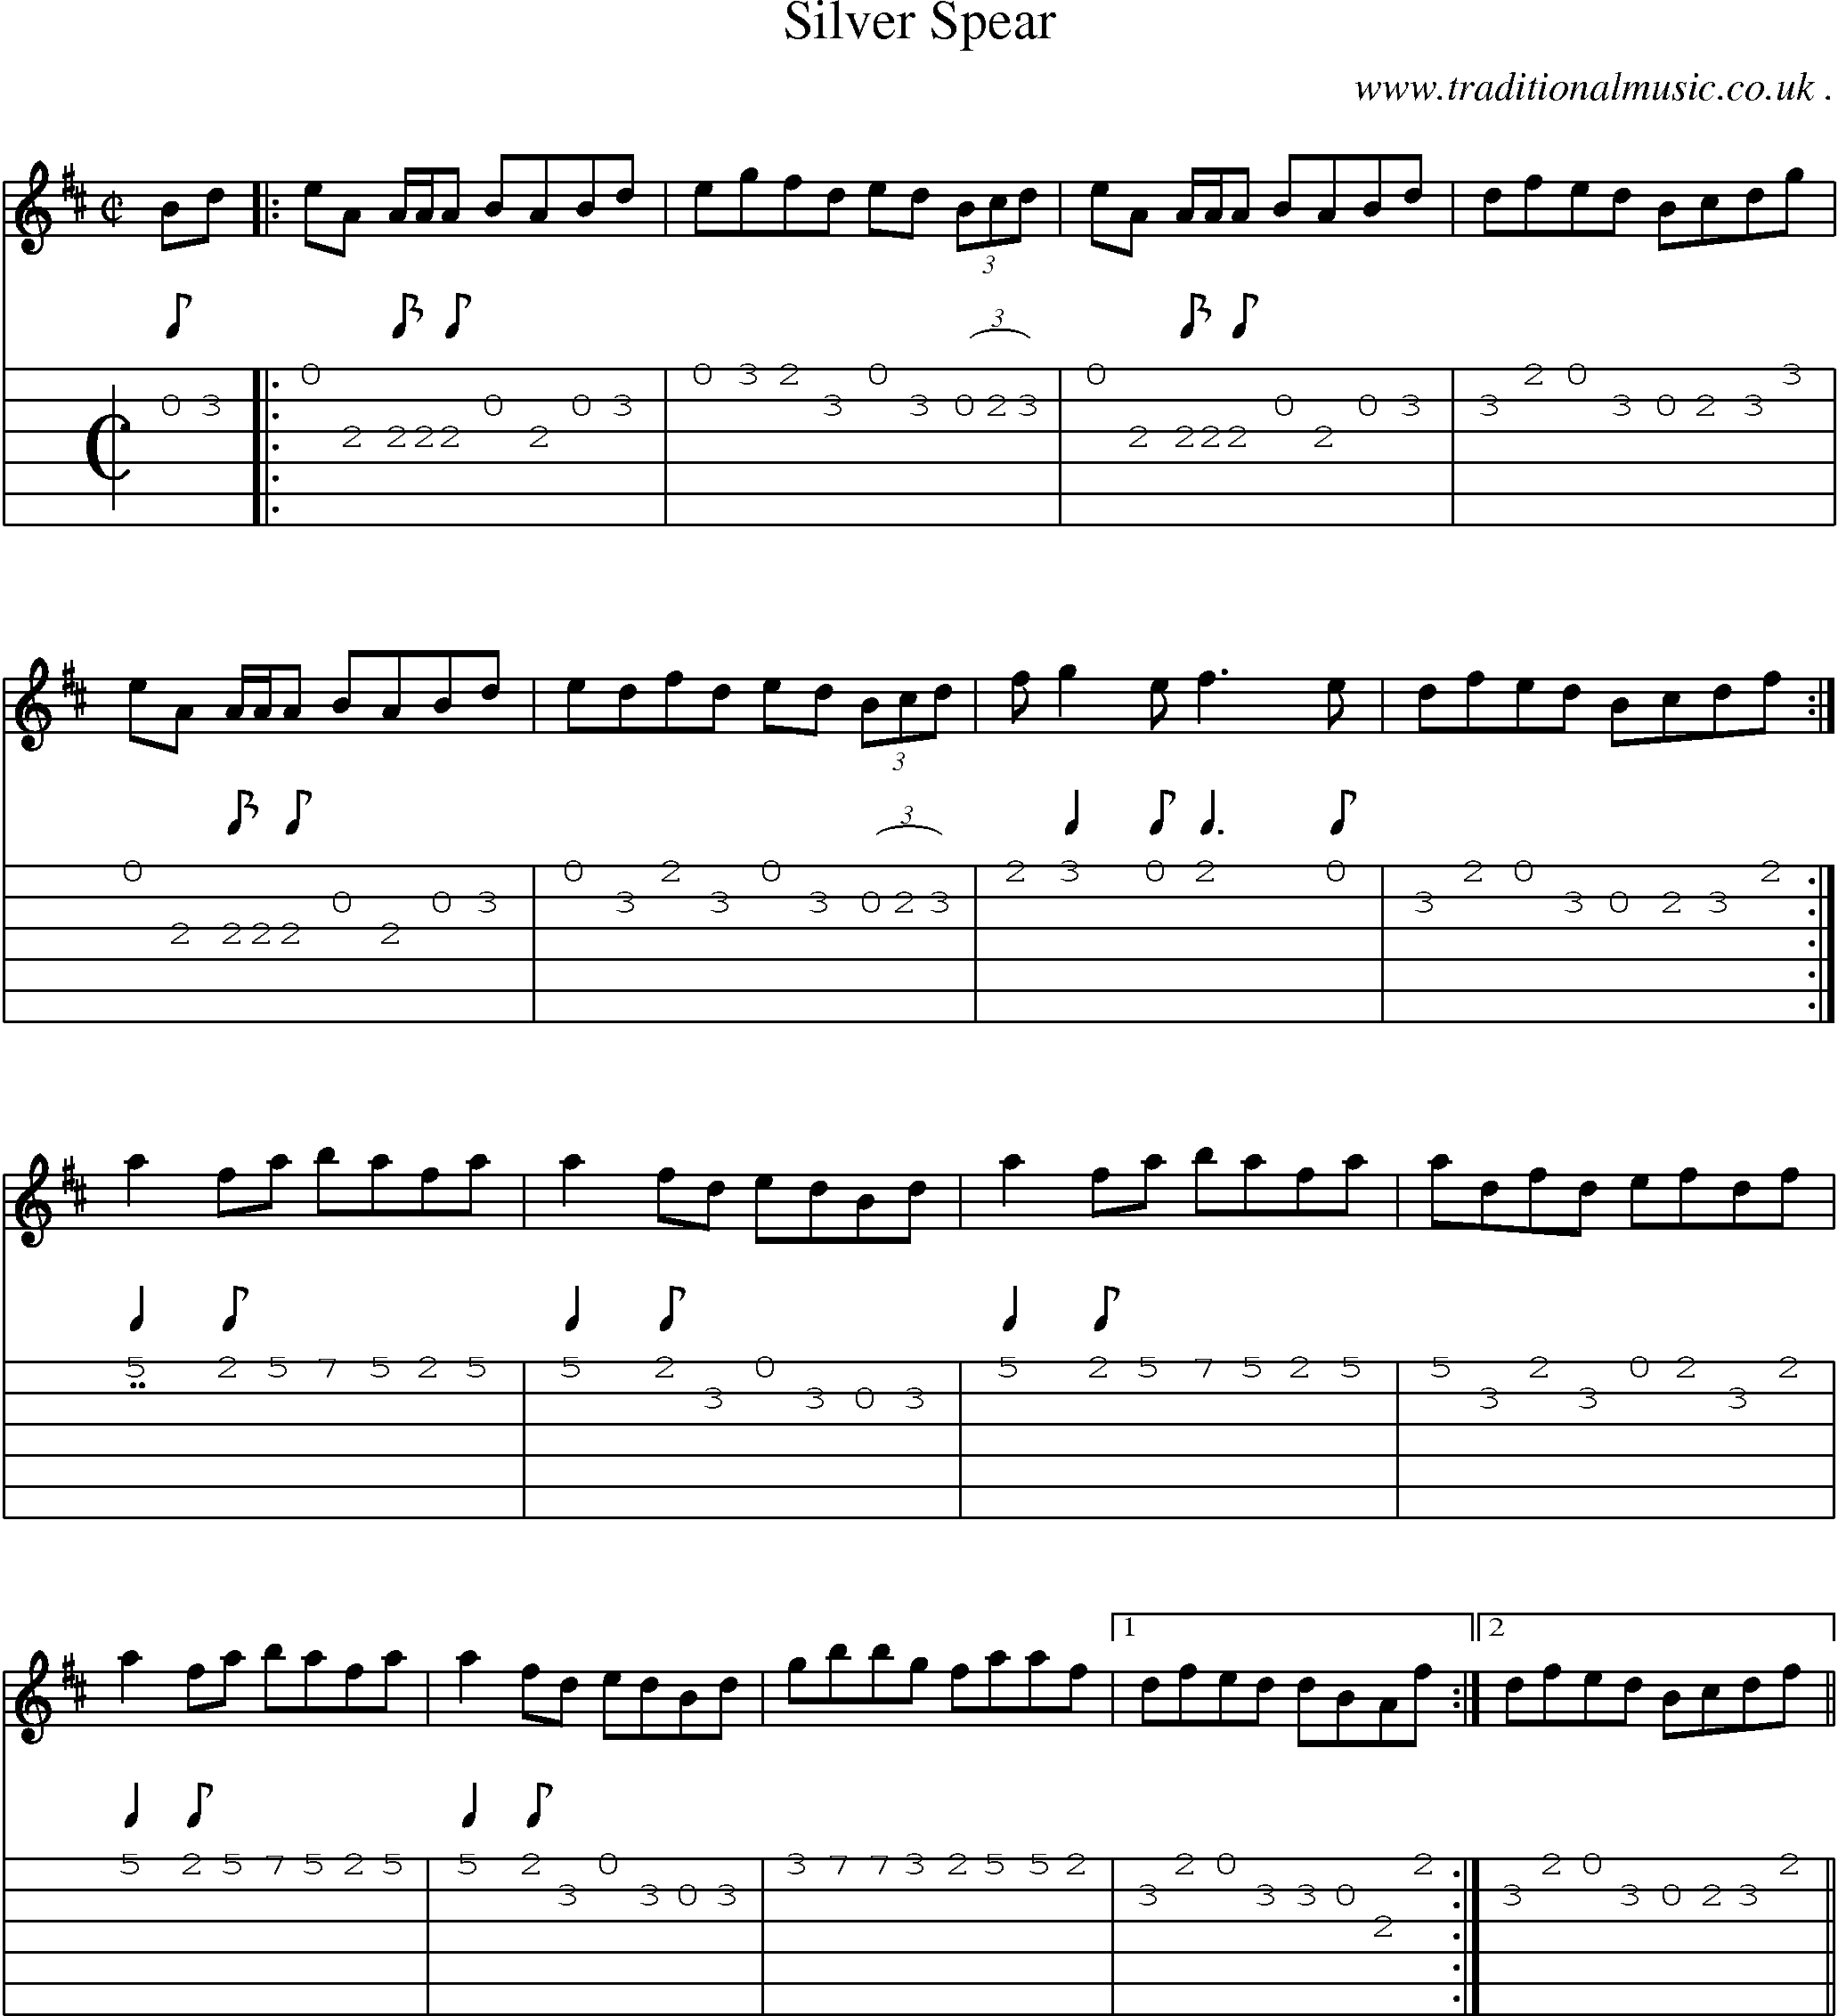 Sheet-Music and Guitar Tabs for Silver Spear